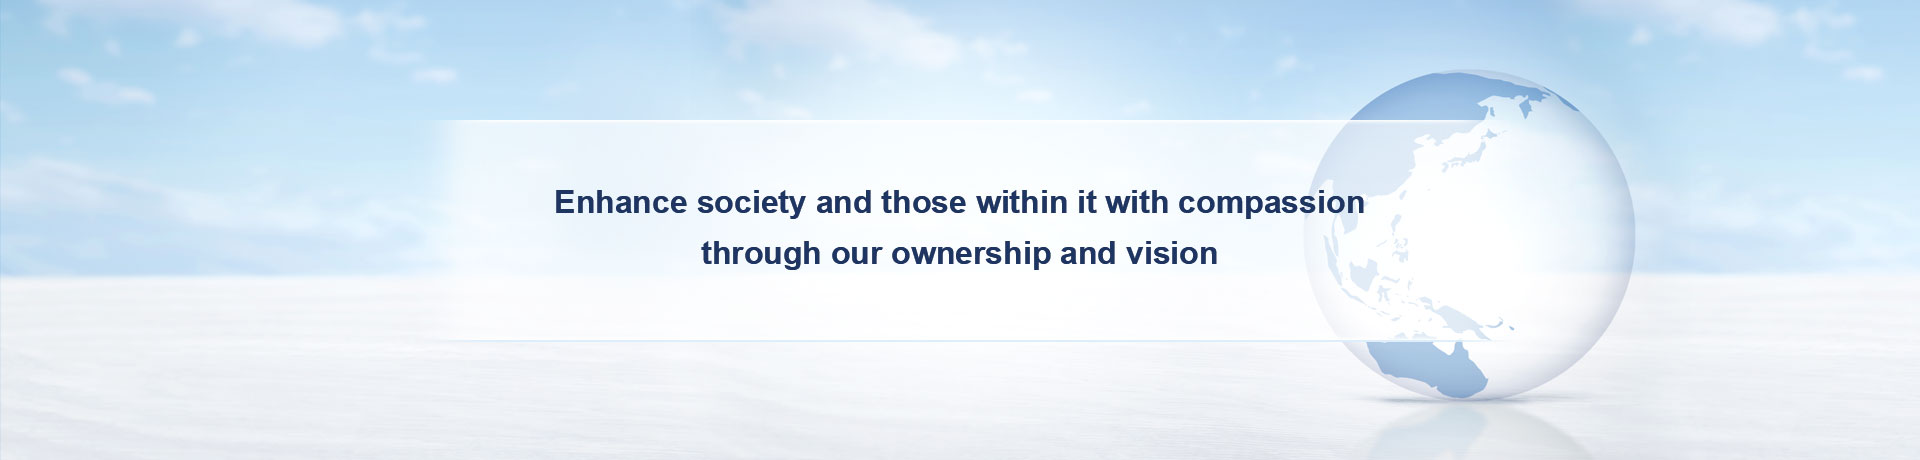 Enhance society and those within it with compassion through our ownership and vision